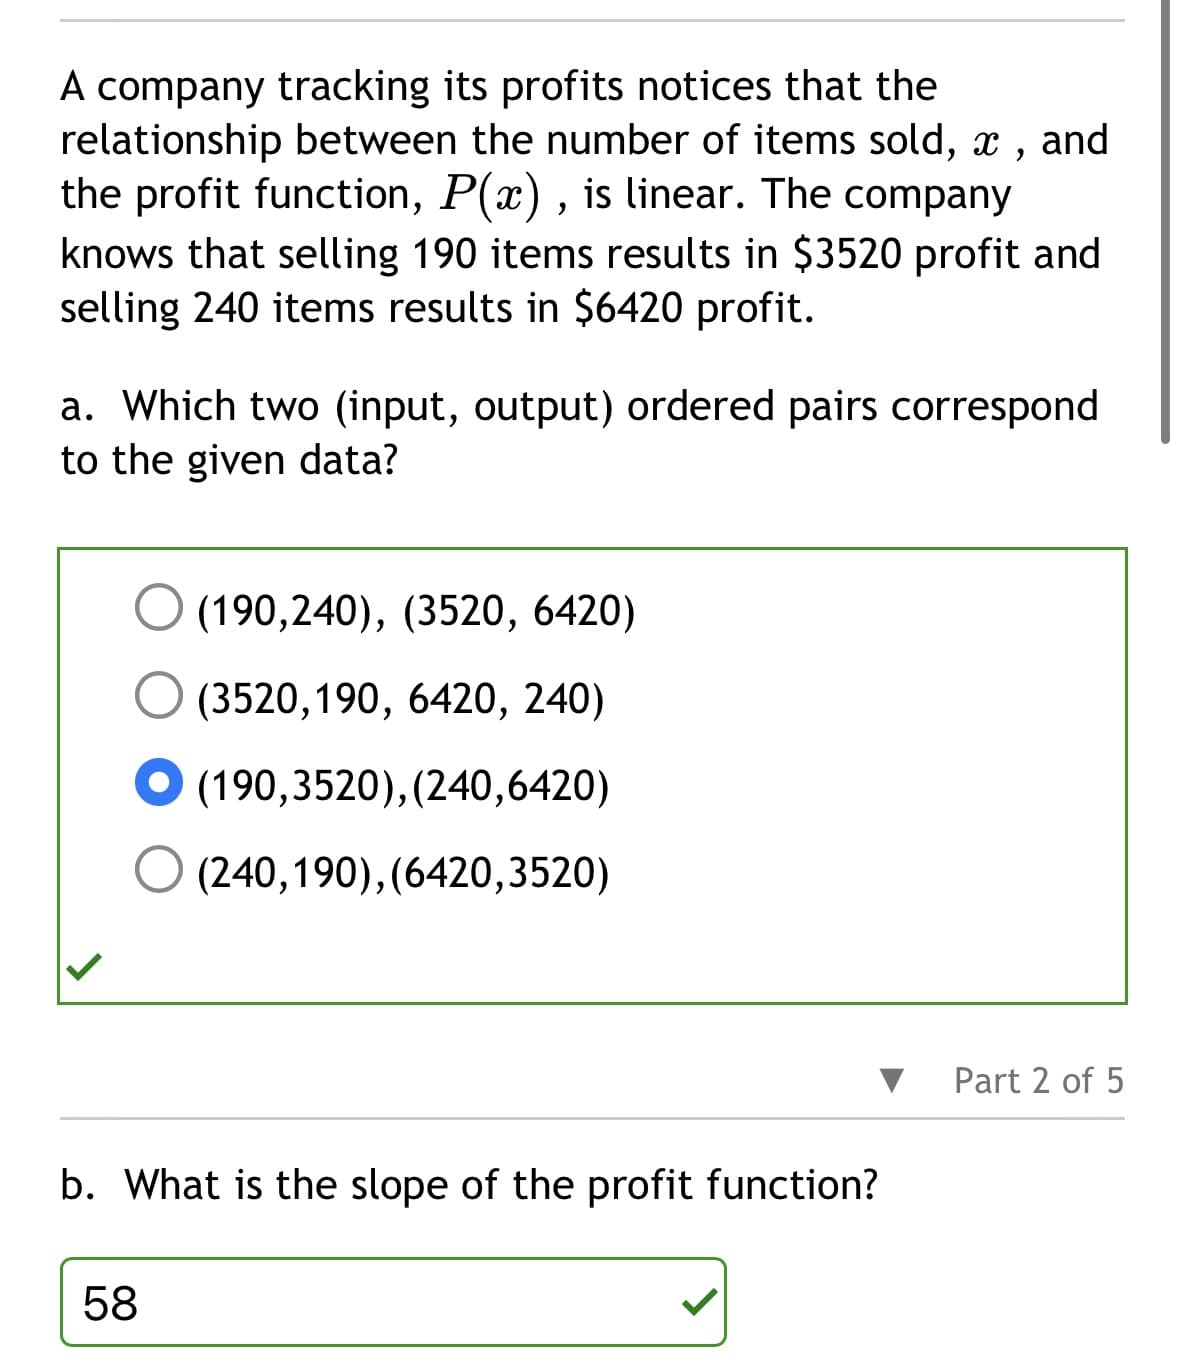 A company tracking its profits notices that the
relationship between the number of items sold, x, and
the profit function, P(x), is linear. The company
knows that selling 190 items results in $3520 profit and
selling 240 items results in $6420 profit.
a. Which two (input, output) ordered pairs correspond
to the given data?
(190,240), (3520, 6420)
(3520,190, 6420, 240)
(190,3520), (240,6420)
58
(240,190),(6420,3520)
b. What is the slope of the profit function?
Part 2 of 5